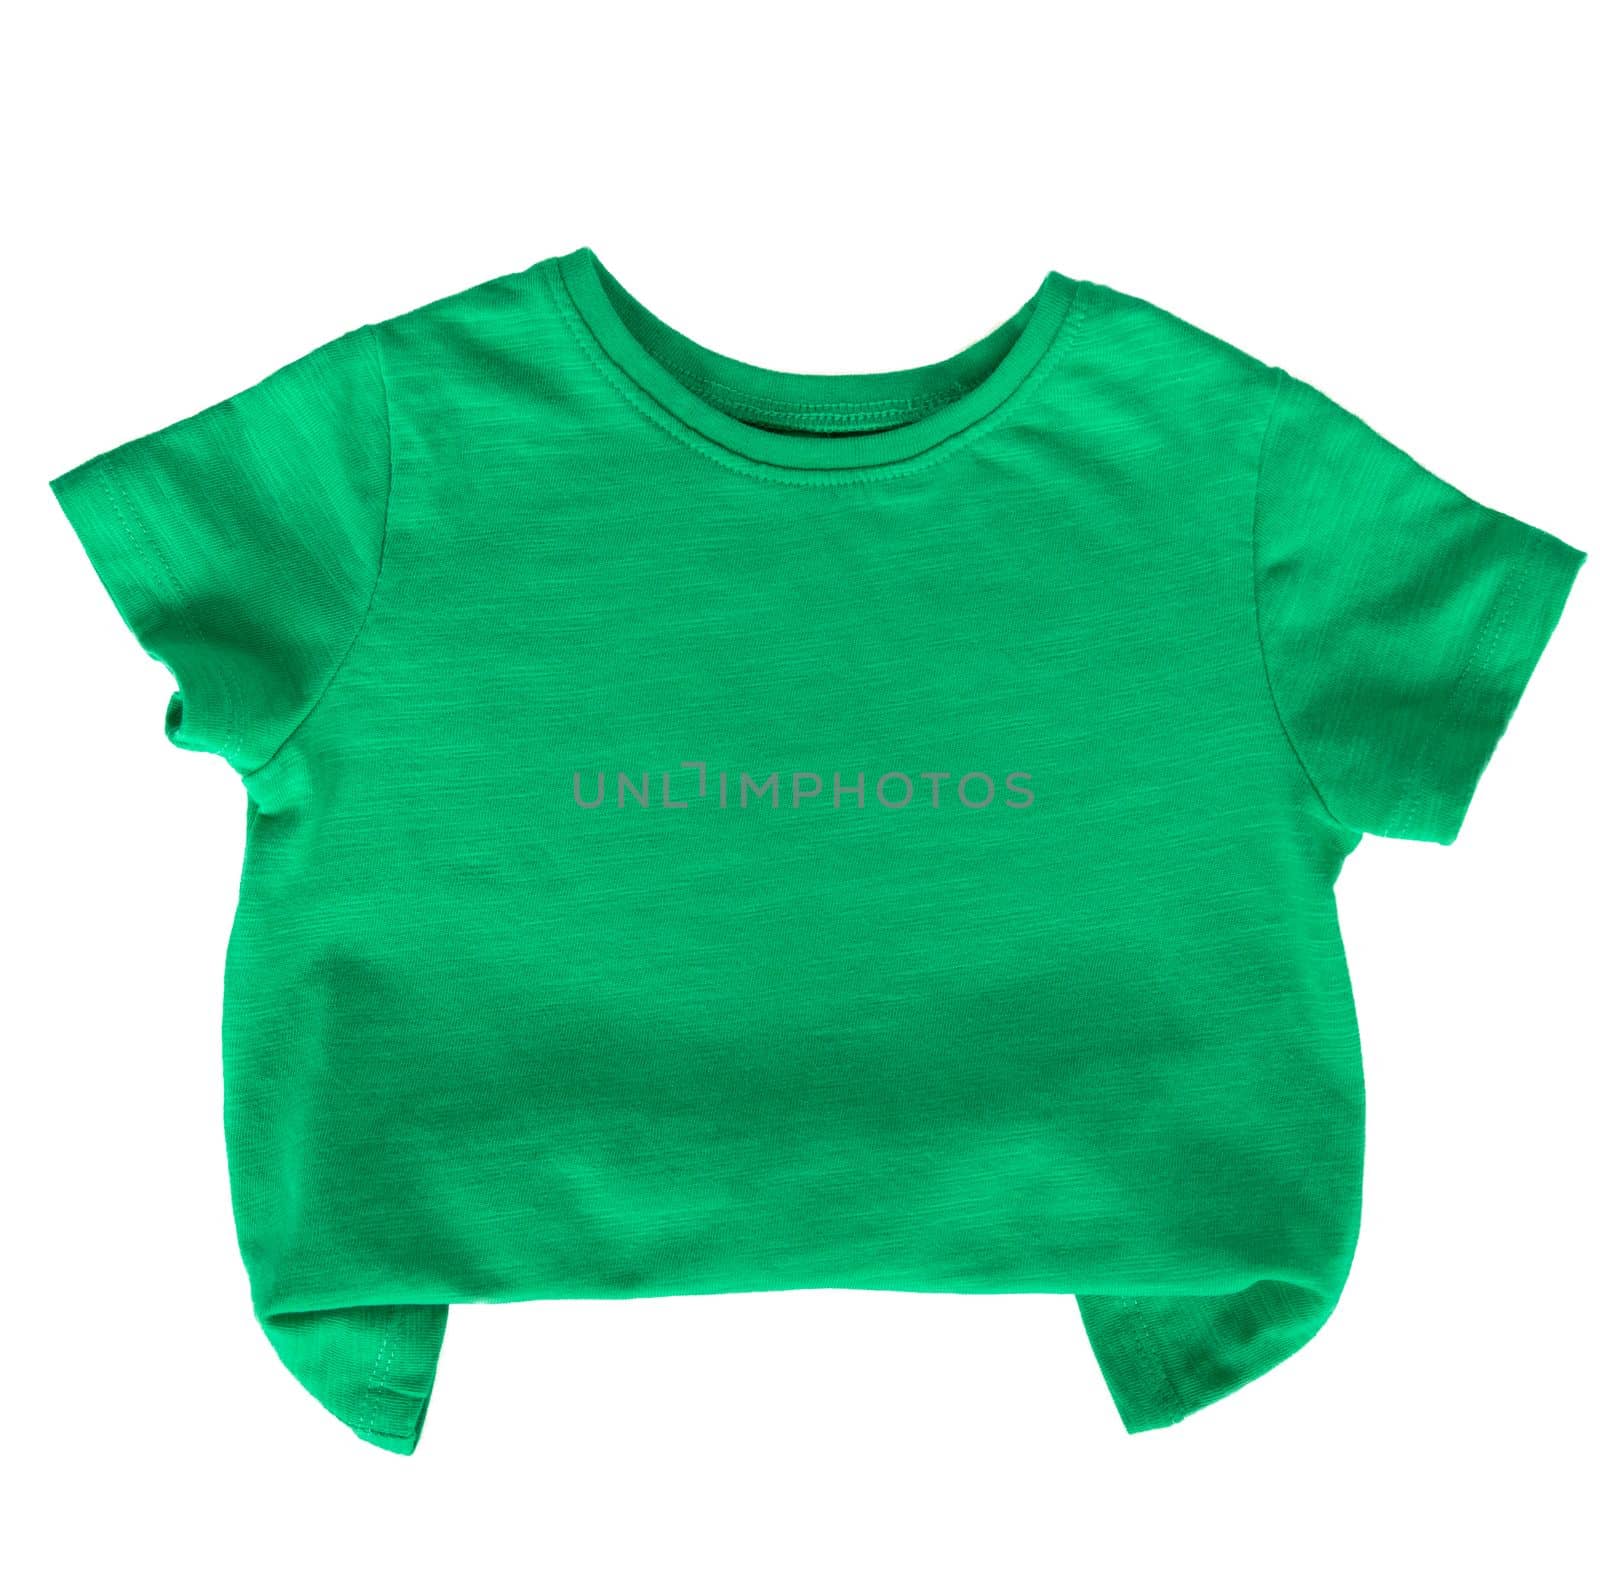 Kids t-shirt isolated on white background. Green color baby tshirt on white. Vivid Color trendy clothes